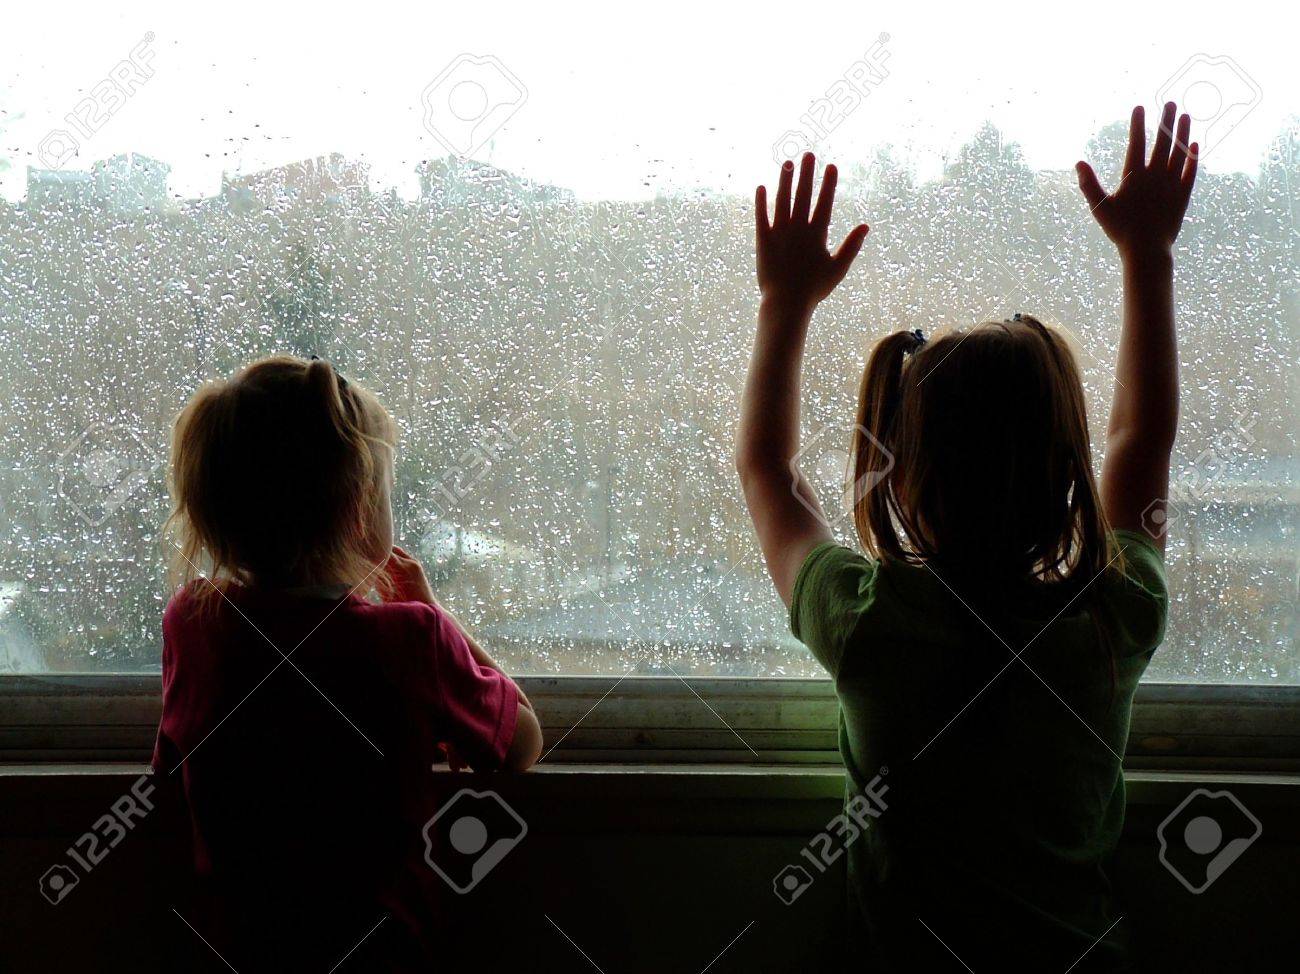 579243-two-little-kids-looking-out-window-on-rainy-day-Stock-Photo.jpg